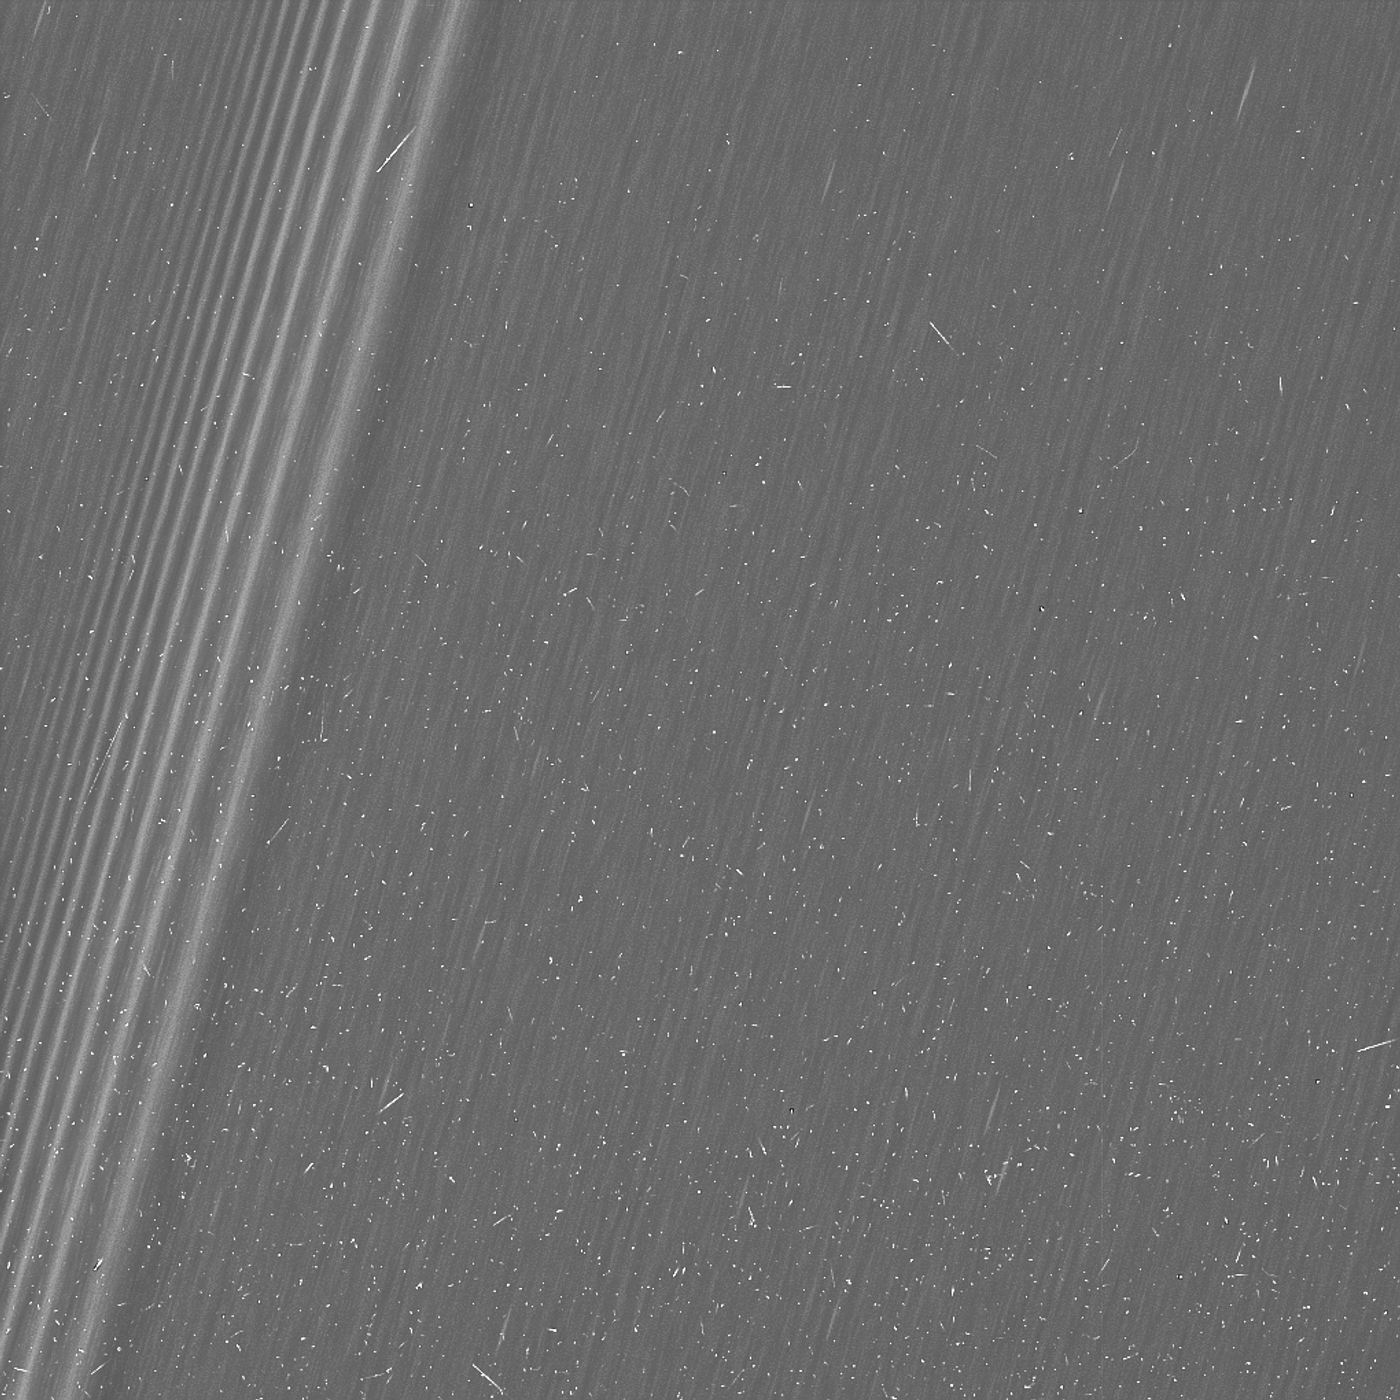 A deeper look at Saturn's A ring reveals the small straw and pinwheel structures.